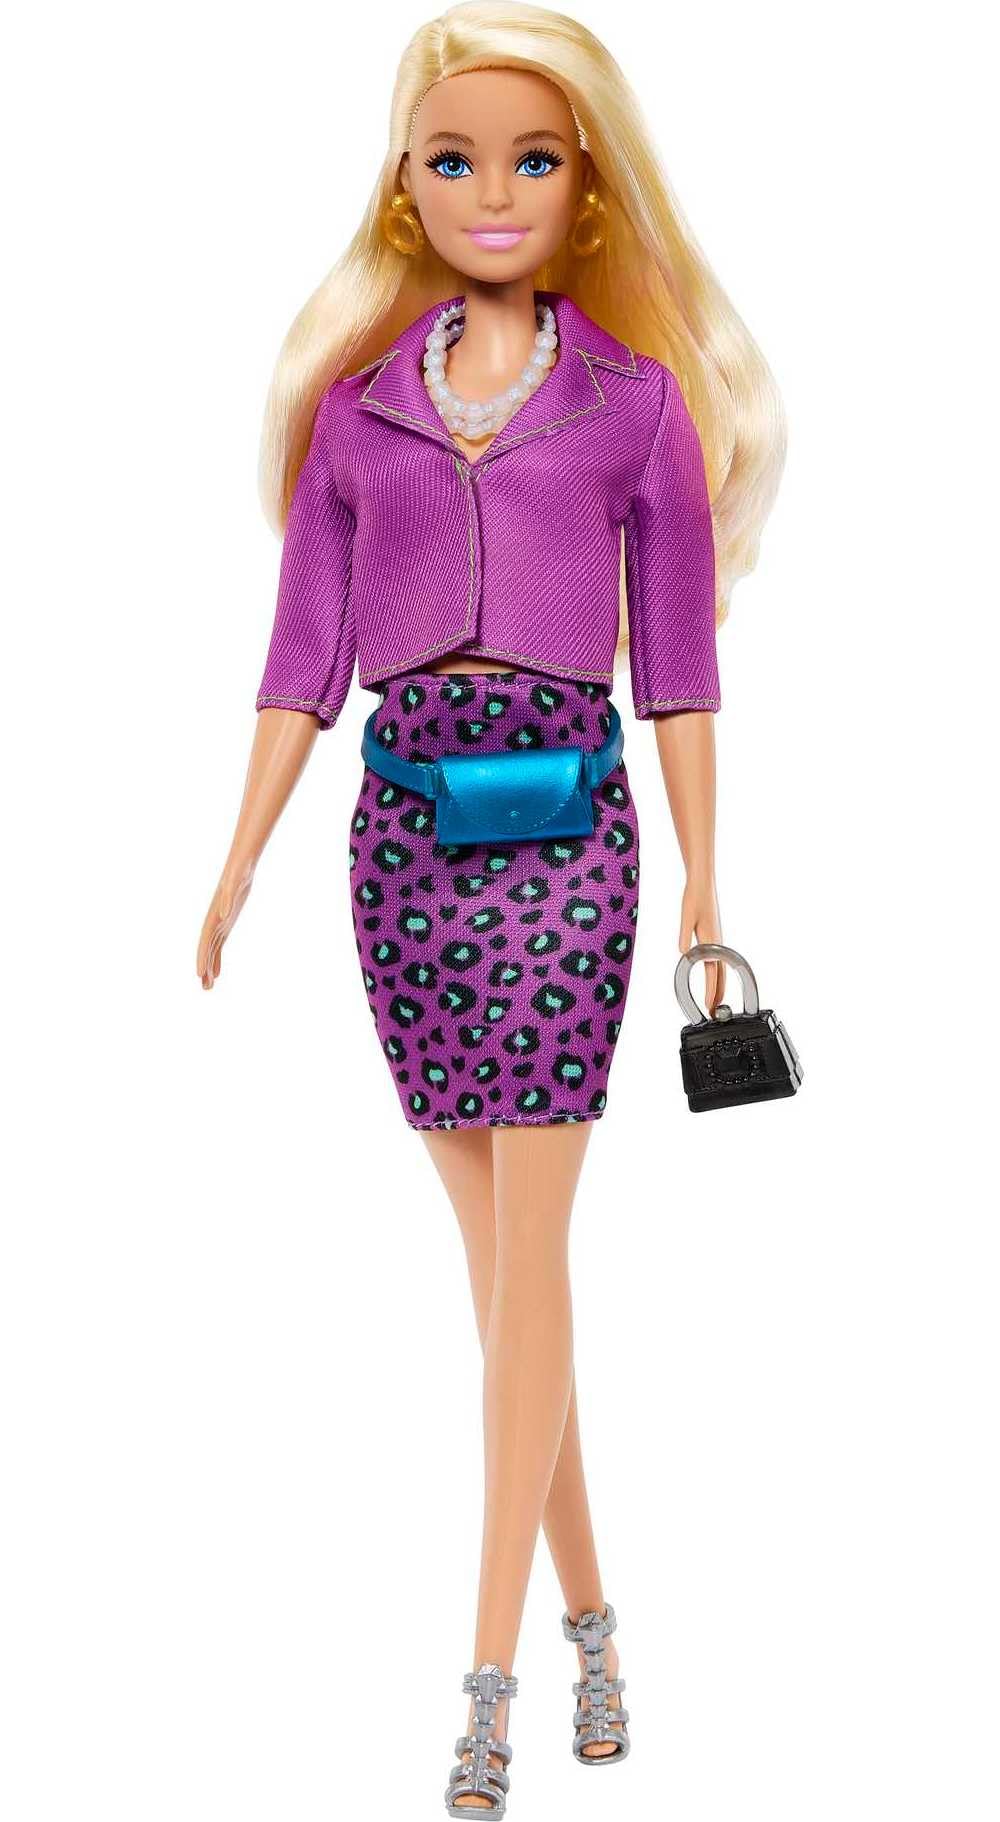 Barbie Doll and Ken Doll Fashion Set with Clothes and Accessories, Dresses, Tees, Pants, Swimsuits and More [Amazon Exclusive]